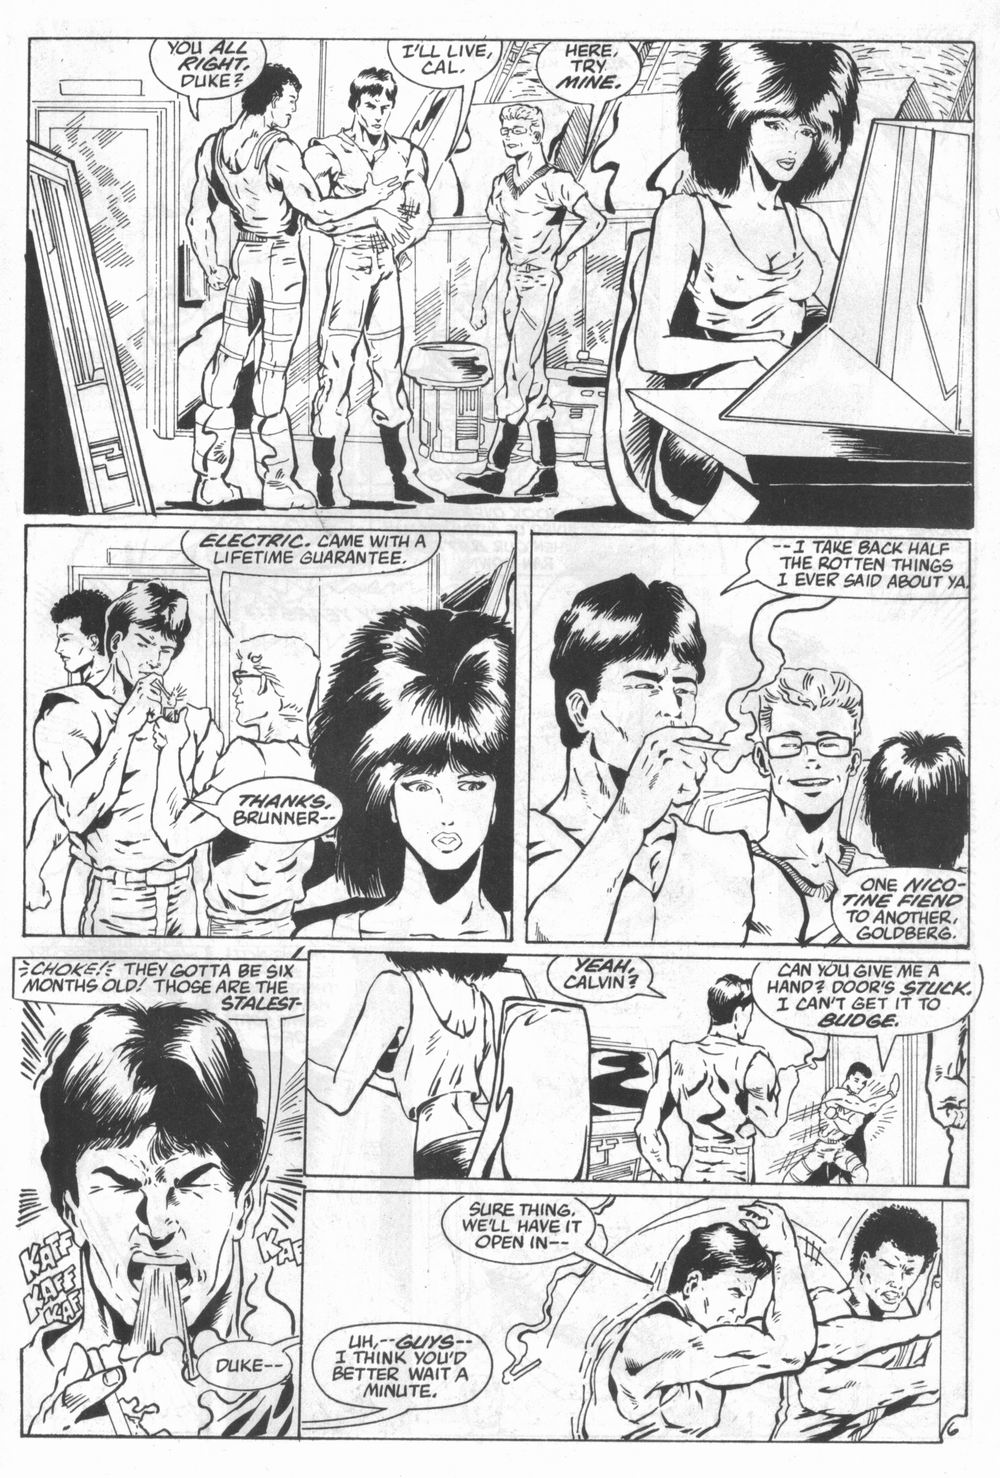 The New Humans Vol. 1 issue 1 - Page 9